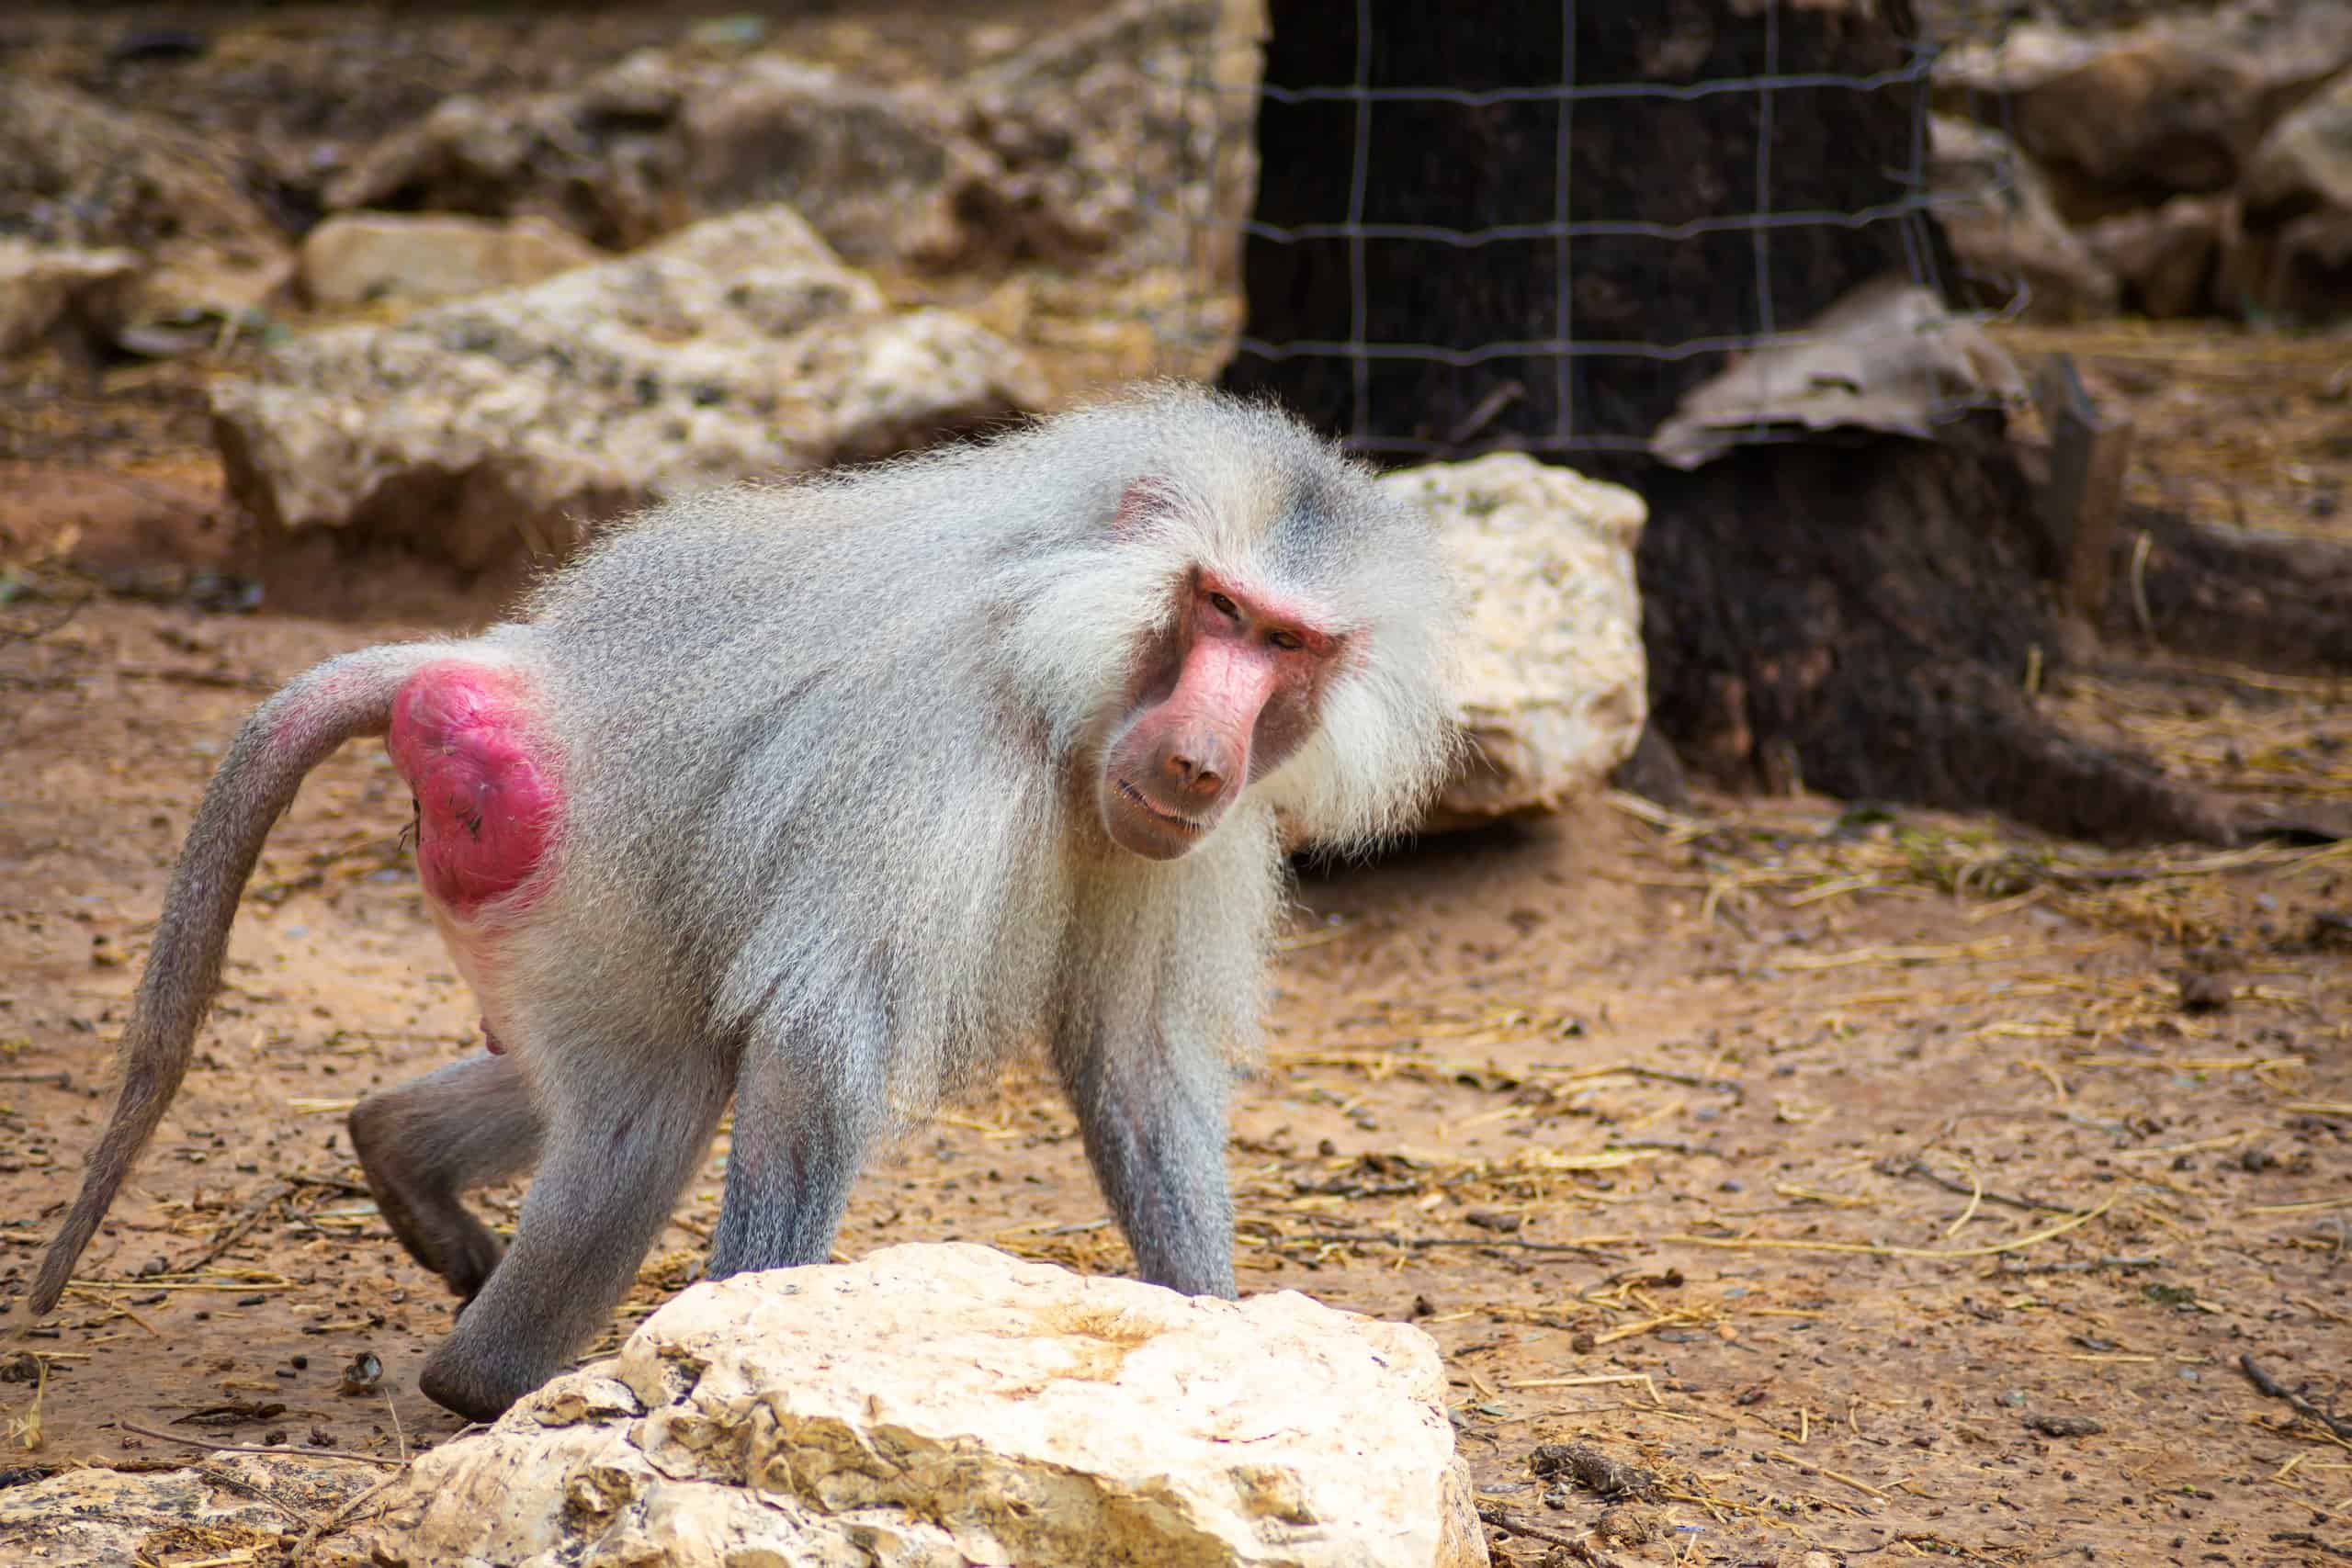 A baboon walking on all fours at the zoo